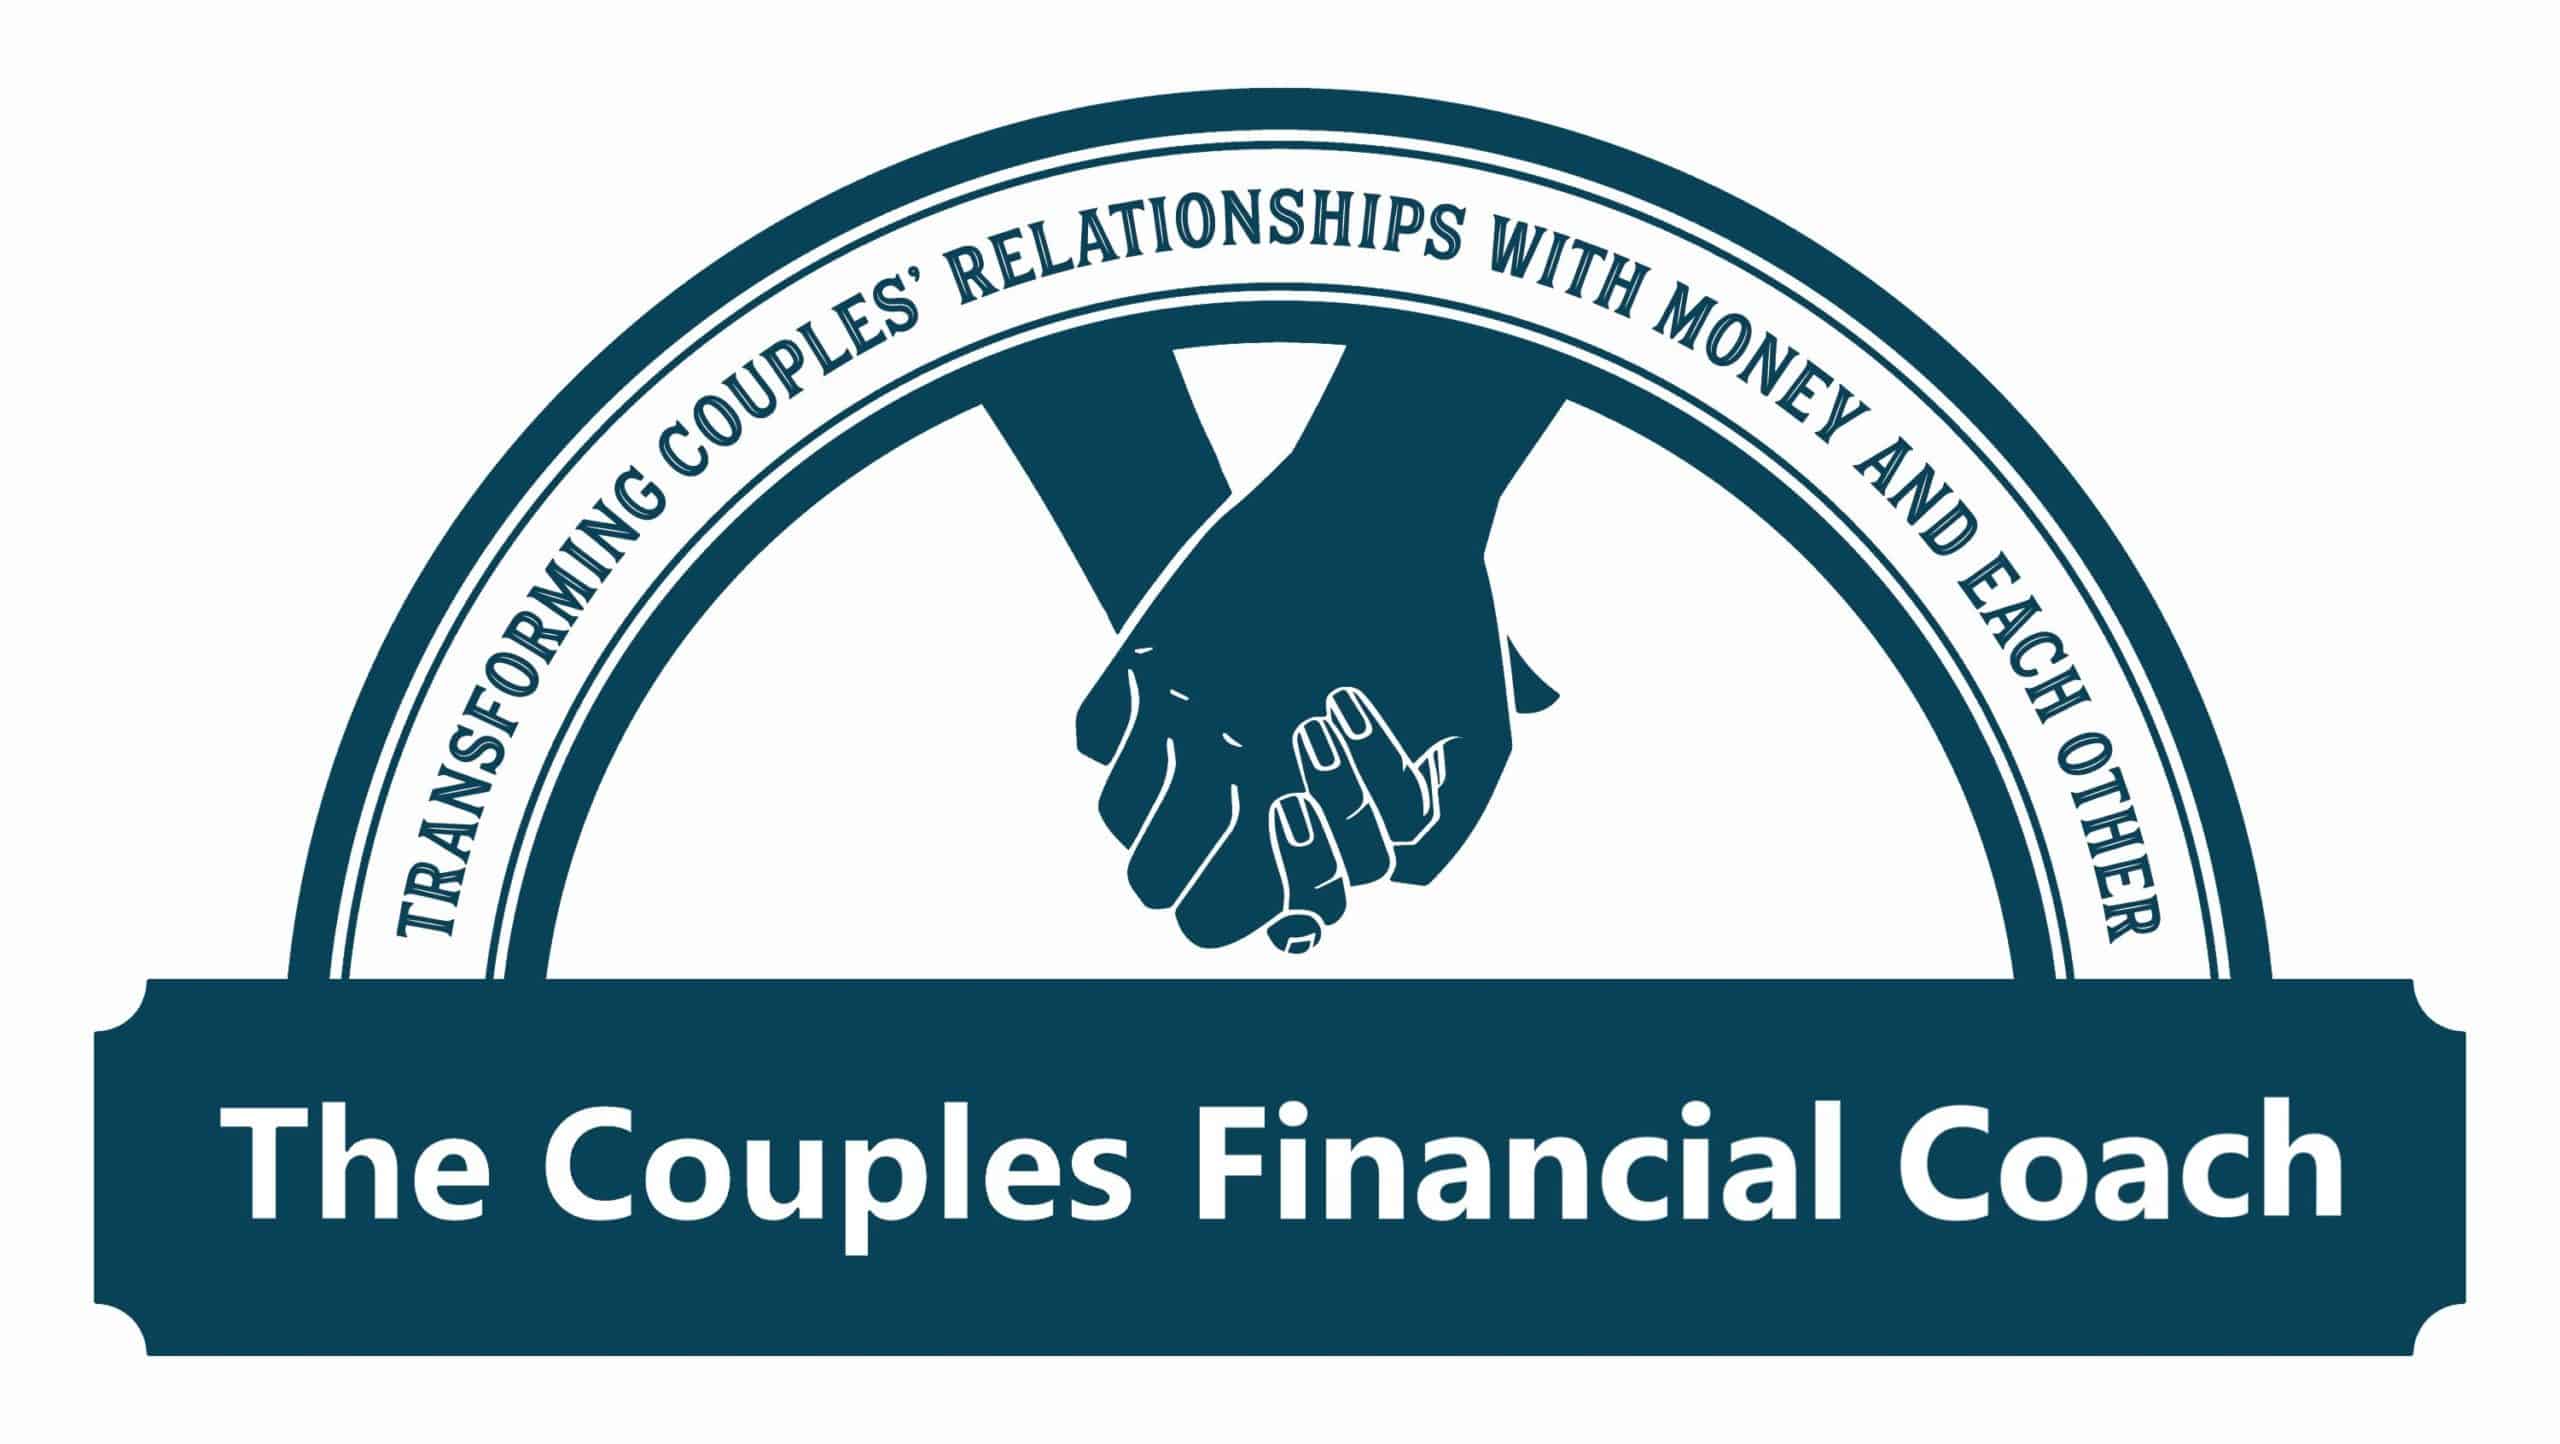 Logo of the couples financial coach depicting two hands clasped together, symbolizing partnership and support in transforming couples' relationships with money and each other.